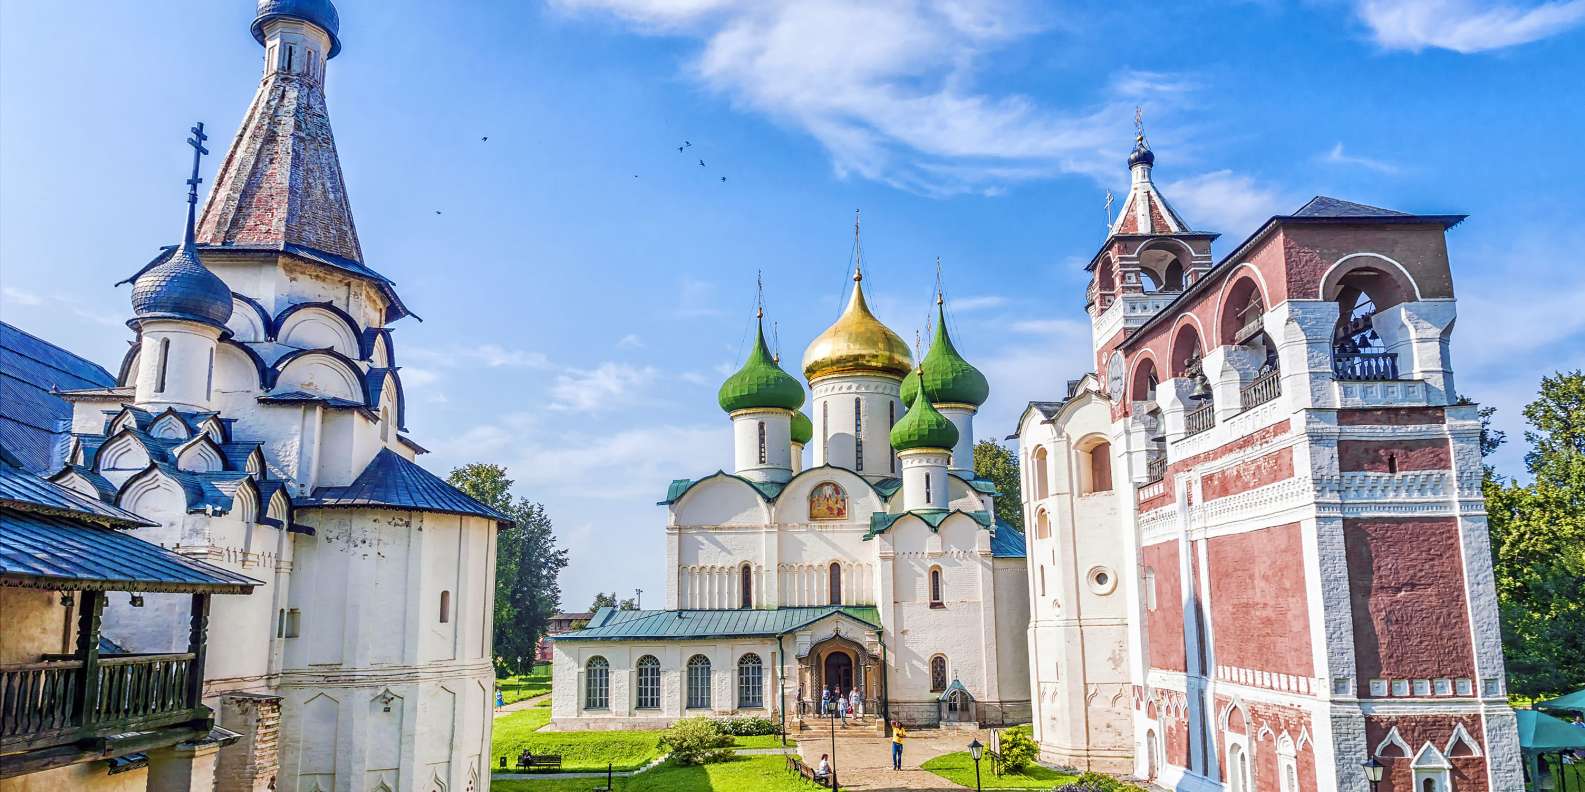 What to do in Suzdal